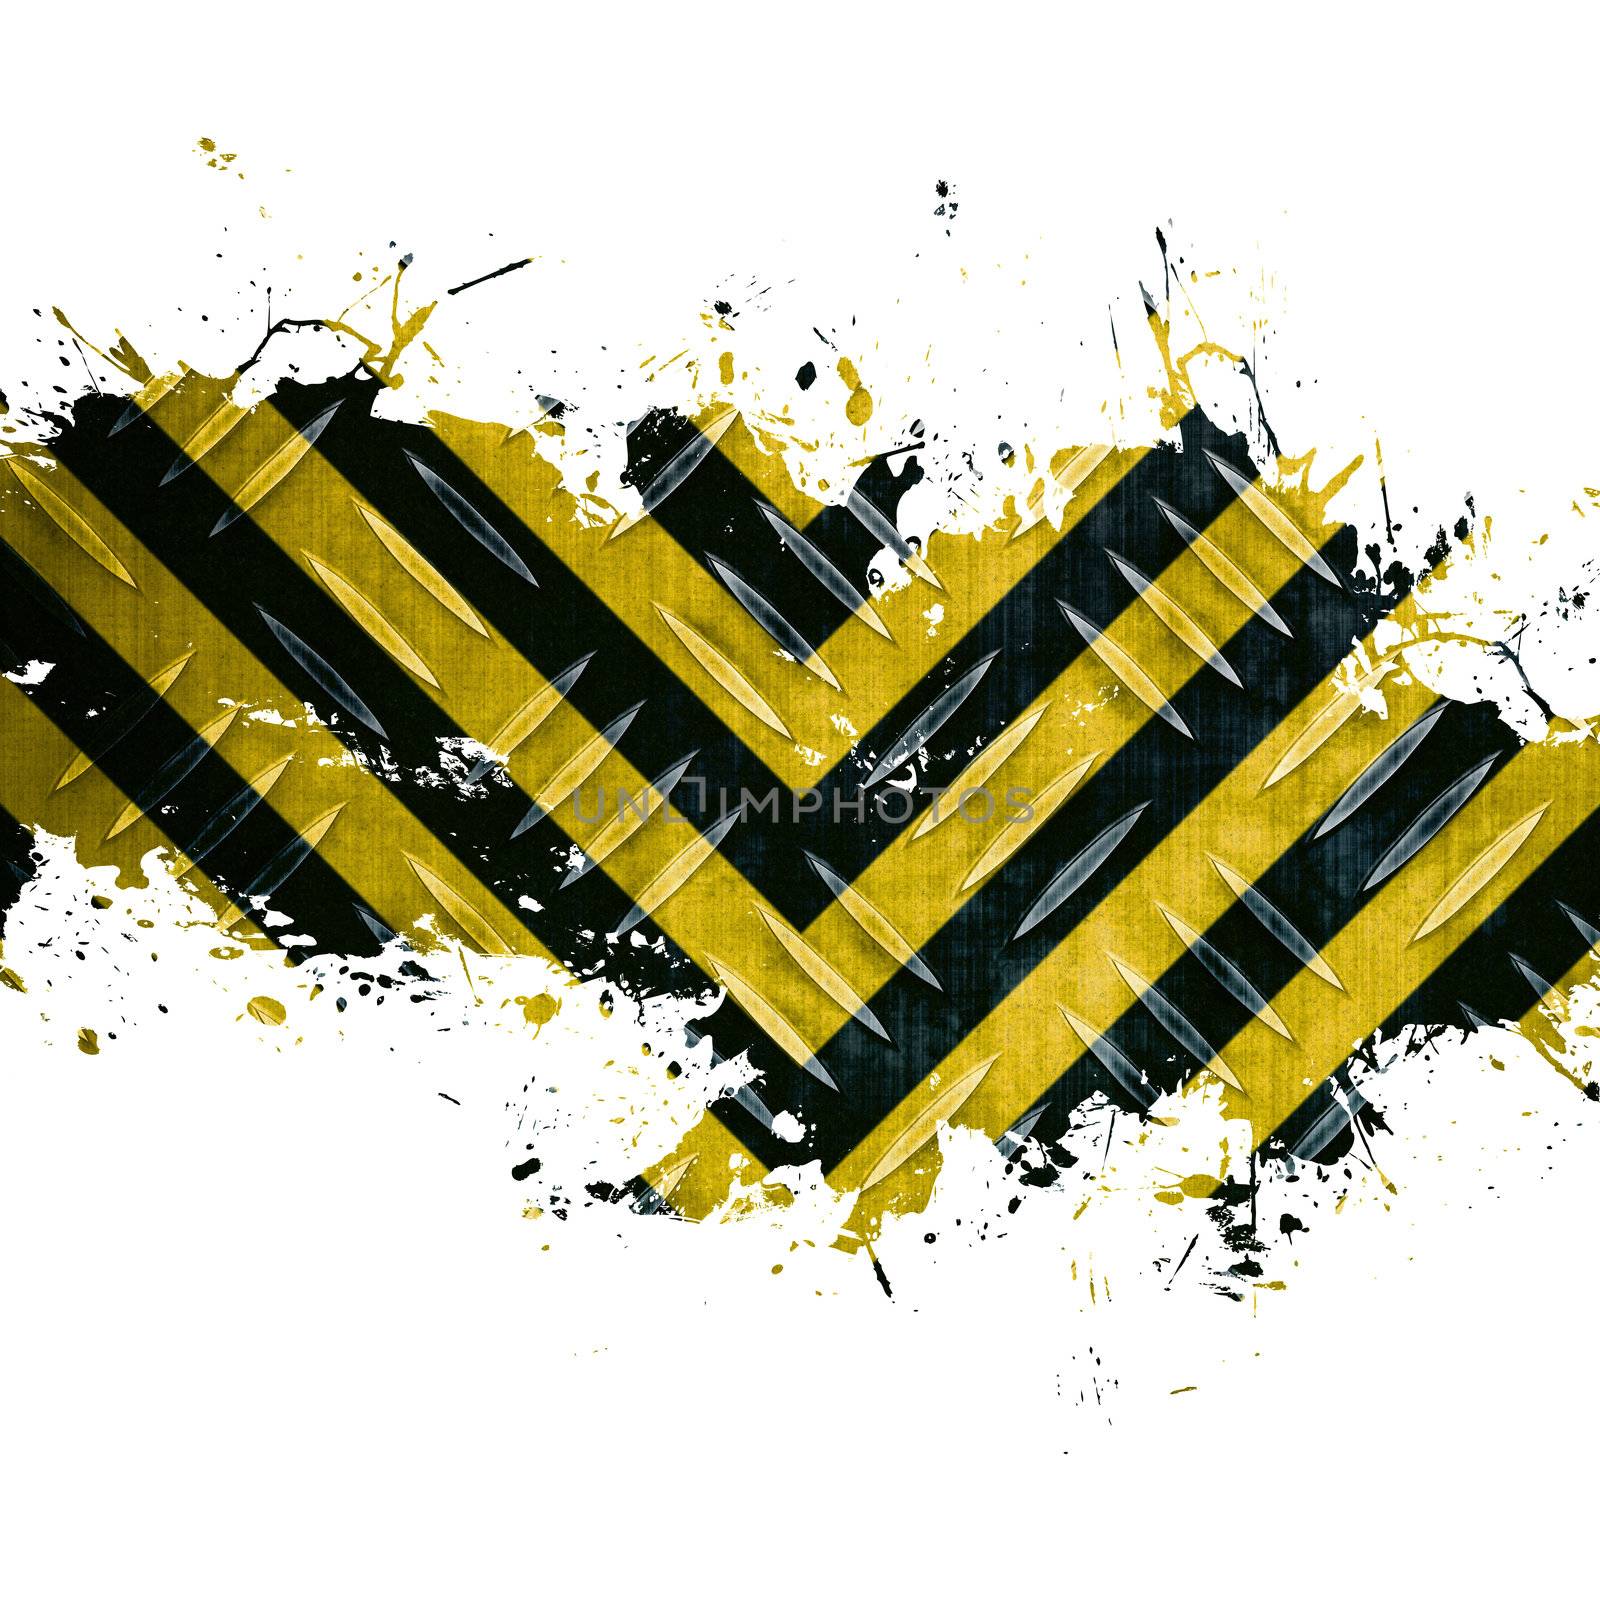 A hazard stripes background with grungy splatter and diamond plate textures isolated over white.